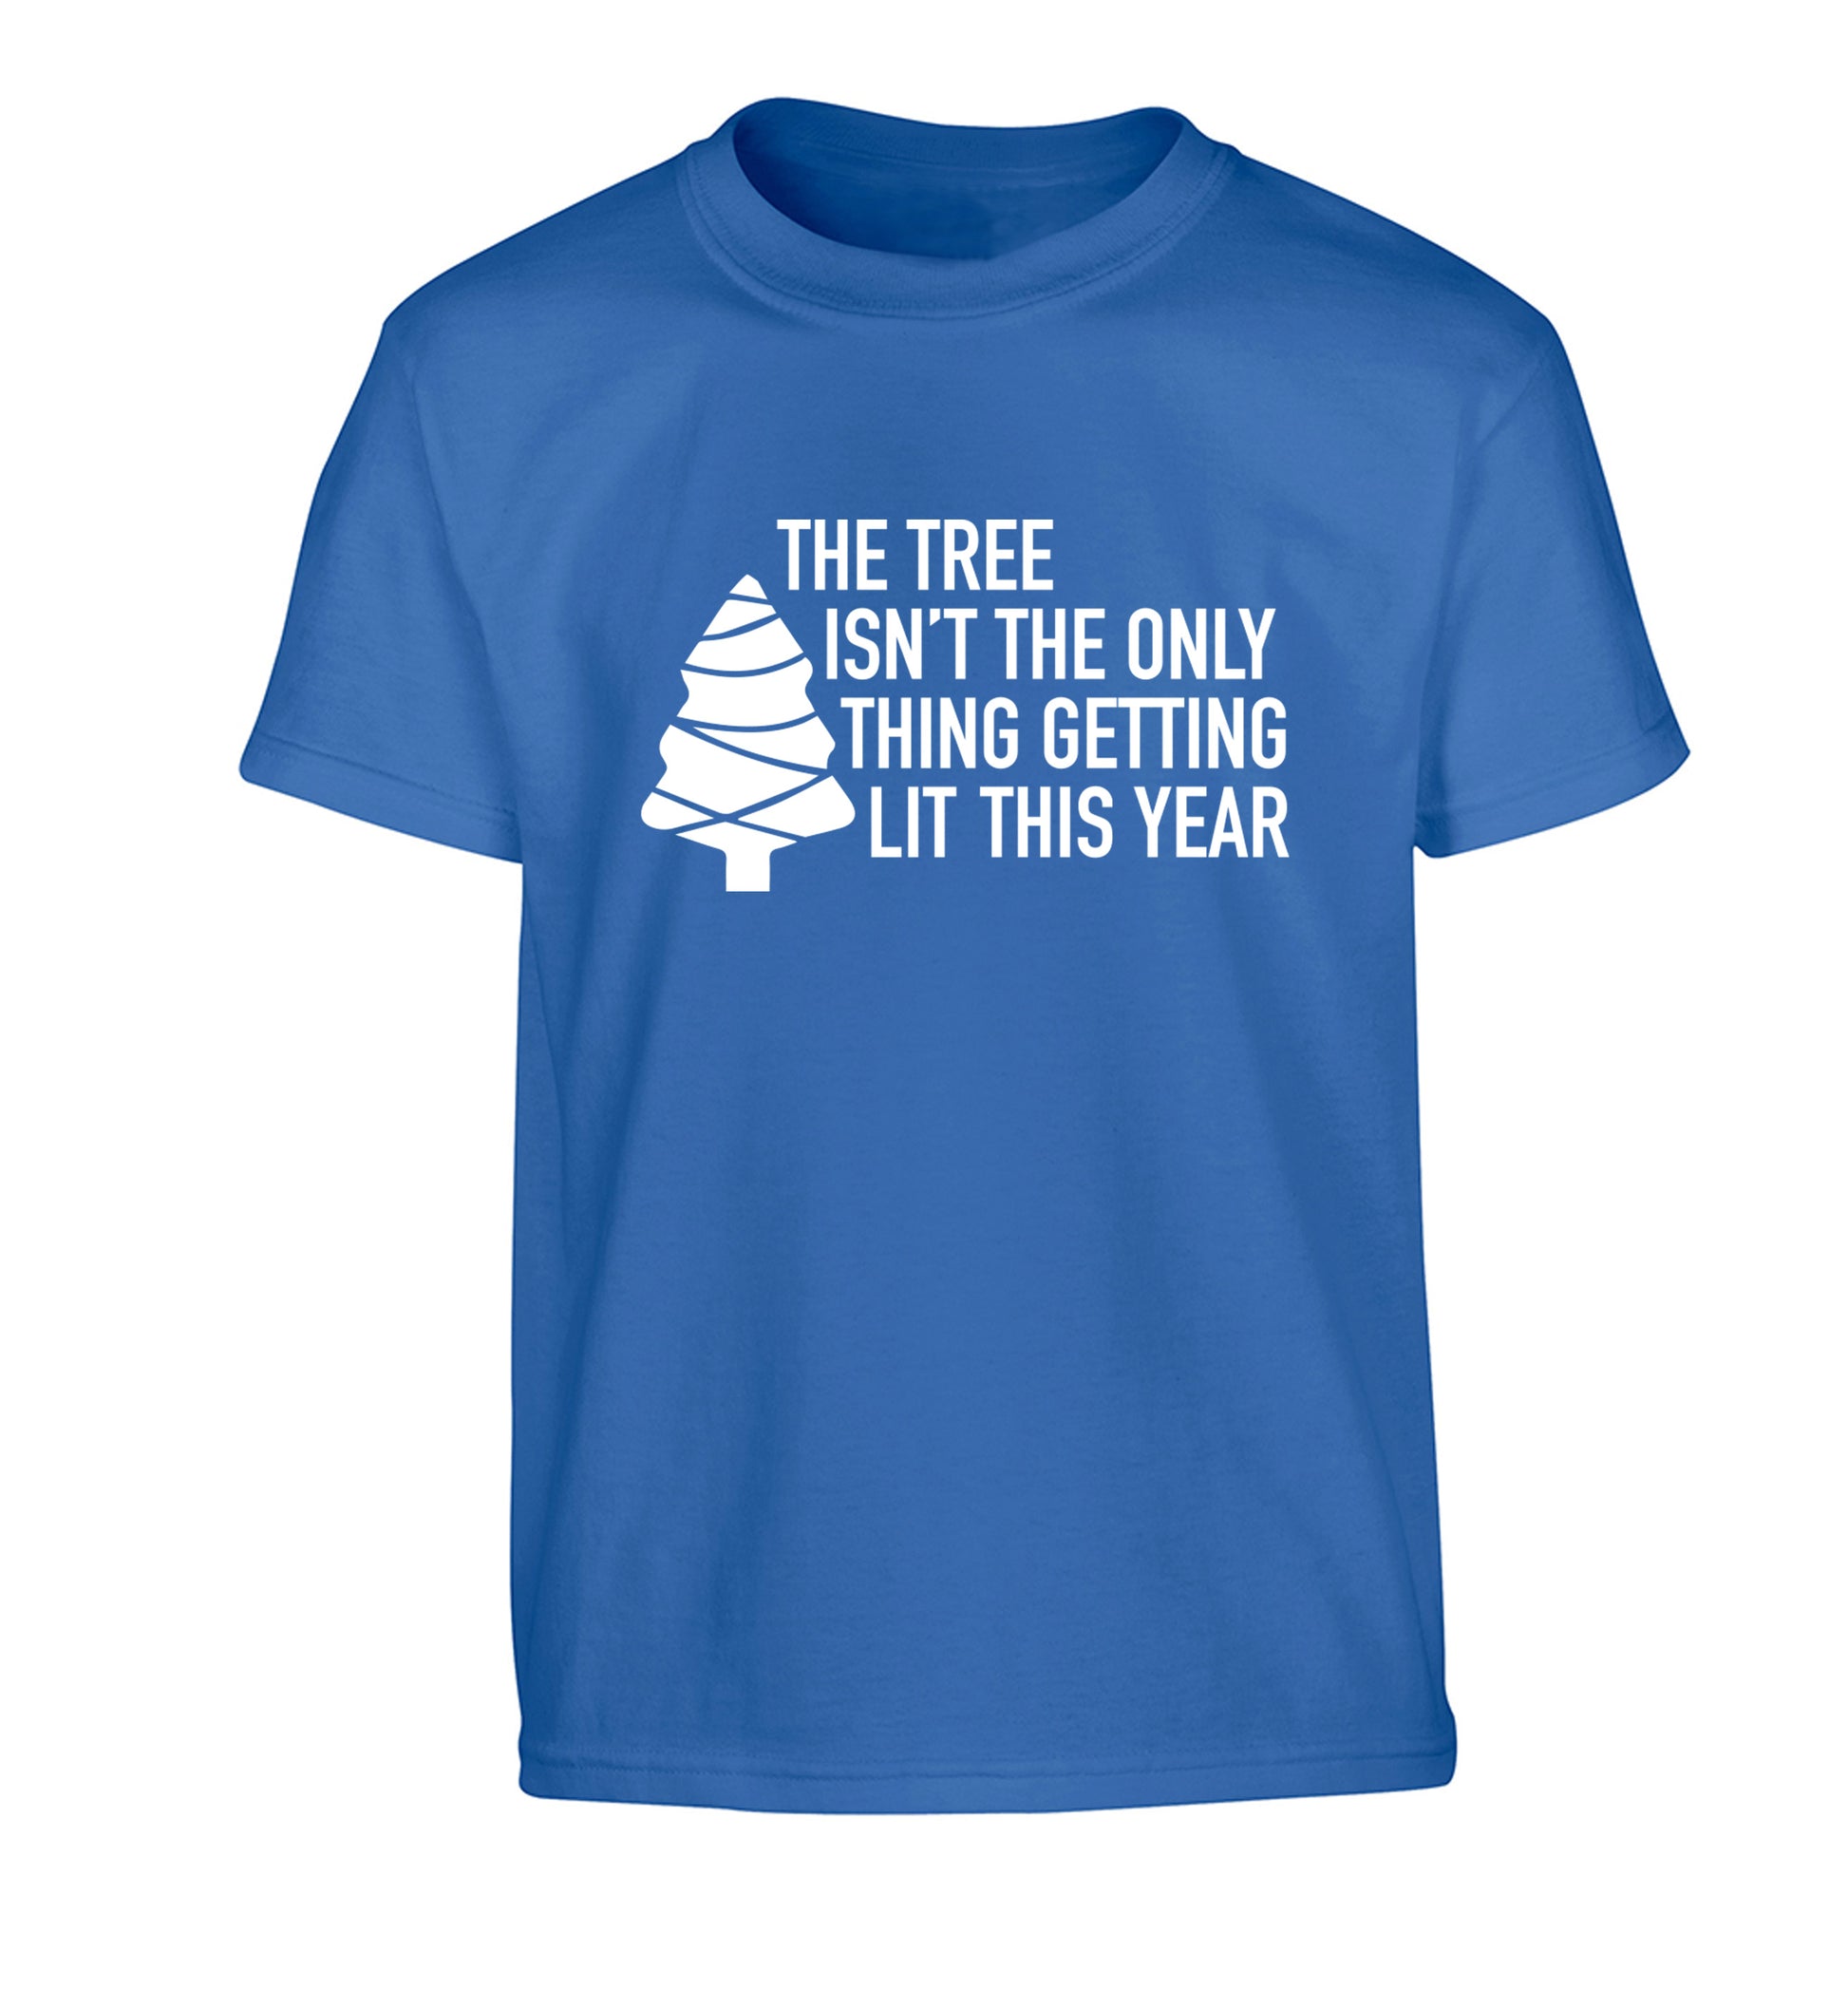 The tree isn't the only thing getting lit this year Children's blue Tshirt 12-14 Years